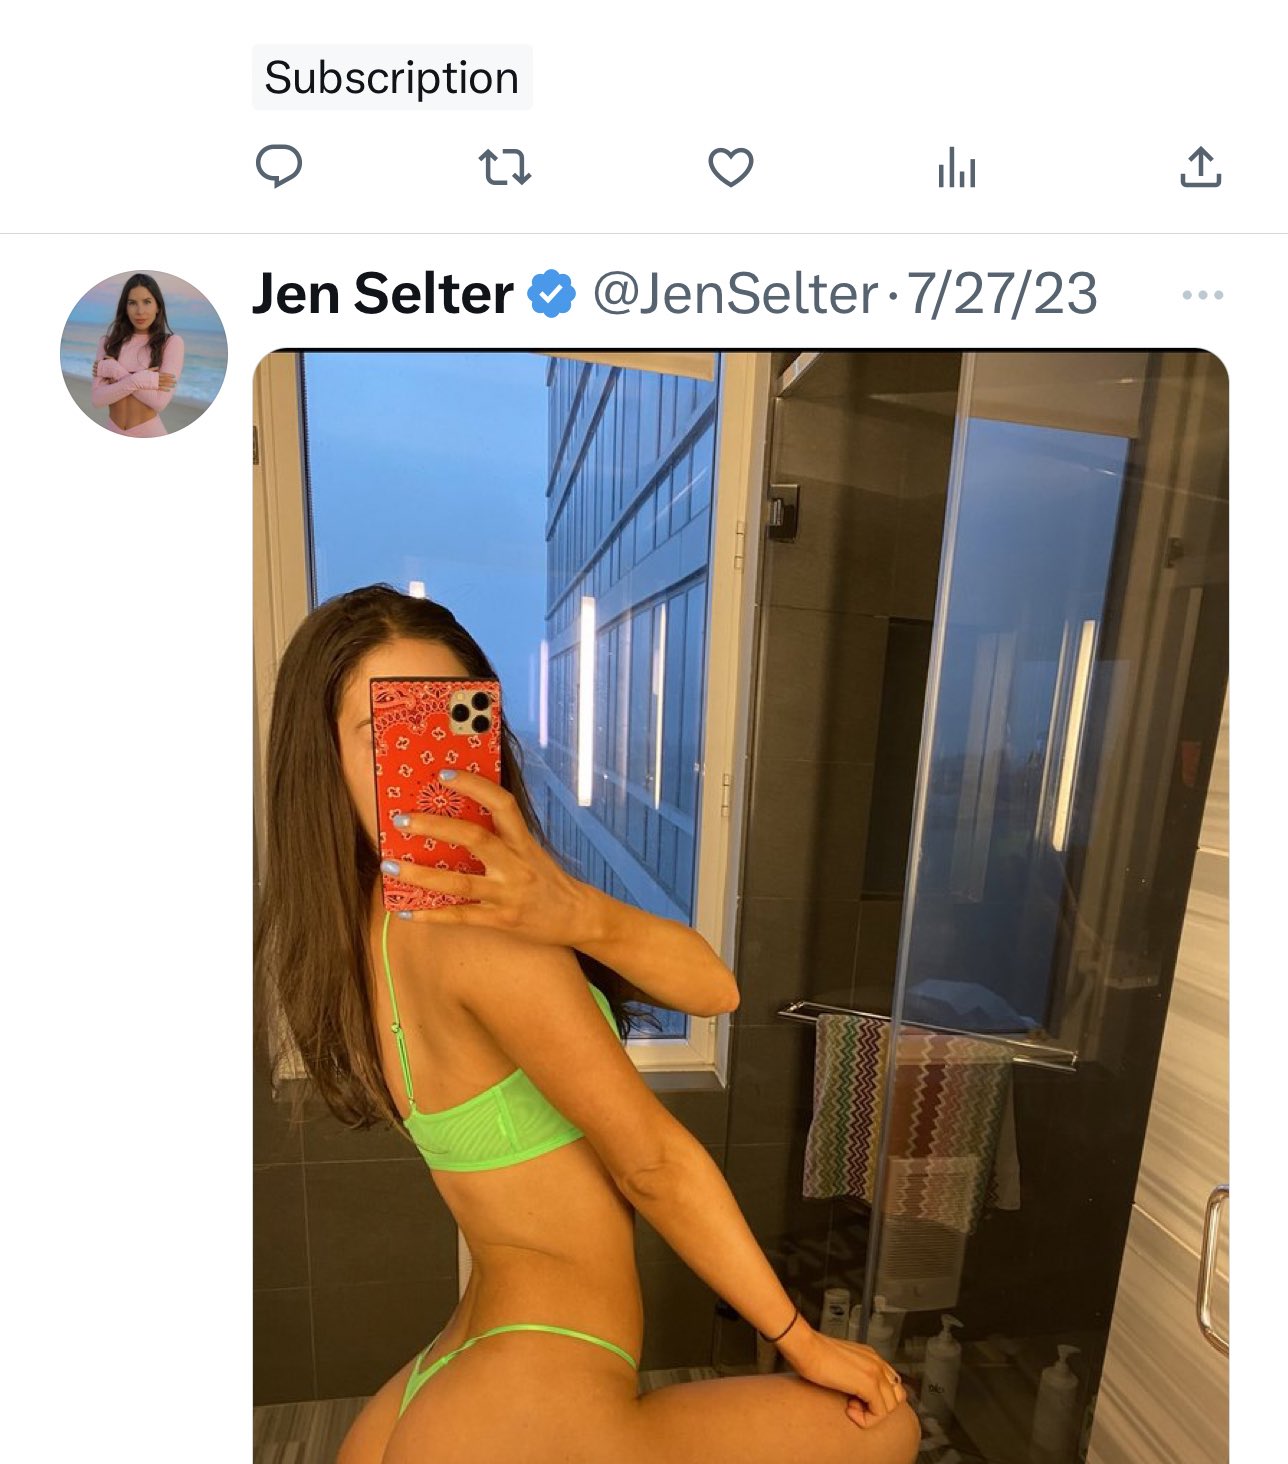 Jen Selter on X: Following all of my subs back! Go ahead and subscribe on  twitter x t.coPJkKi59jYT  X